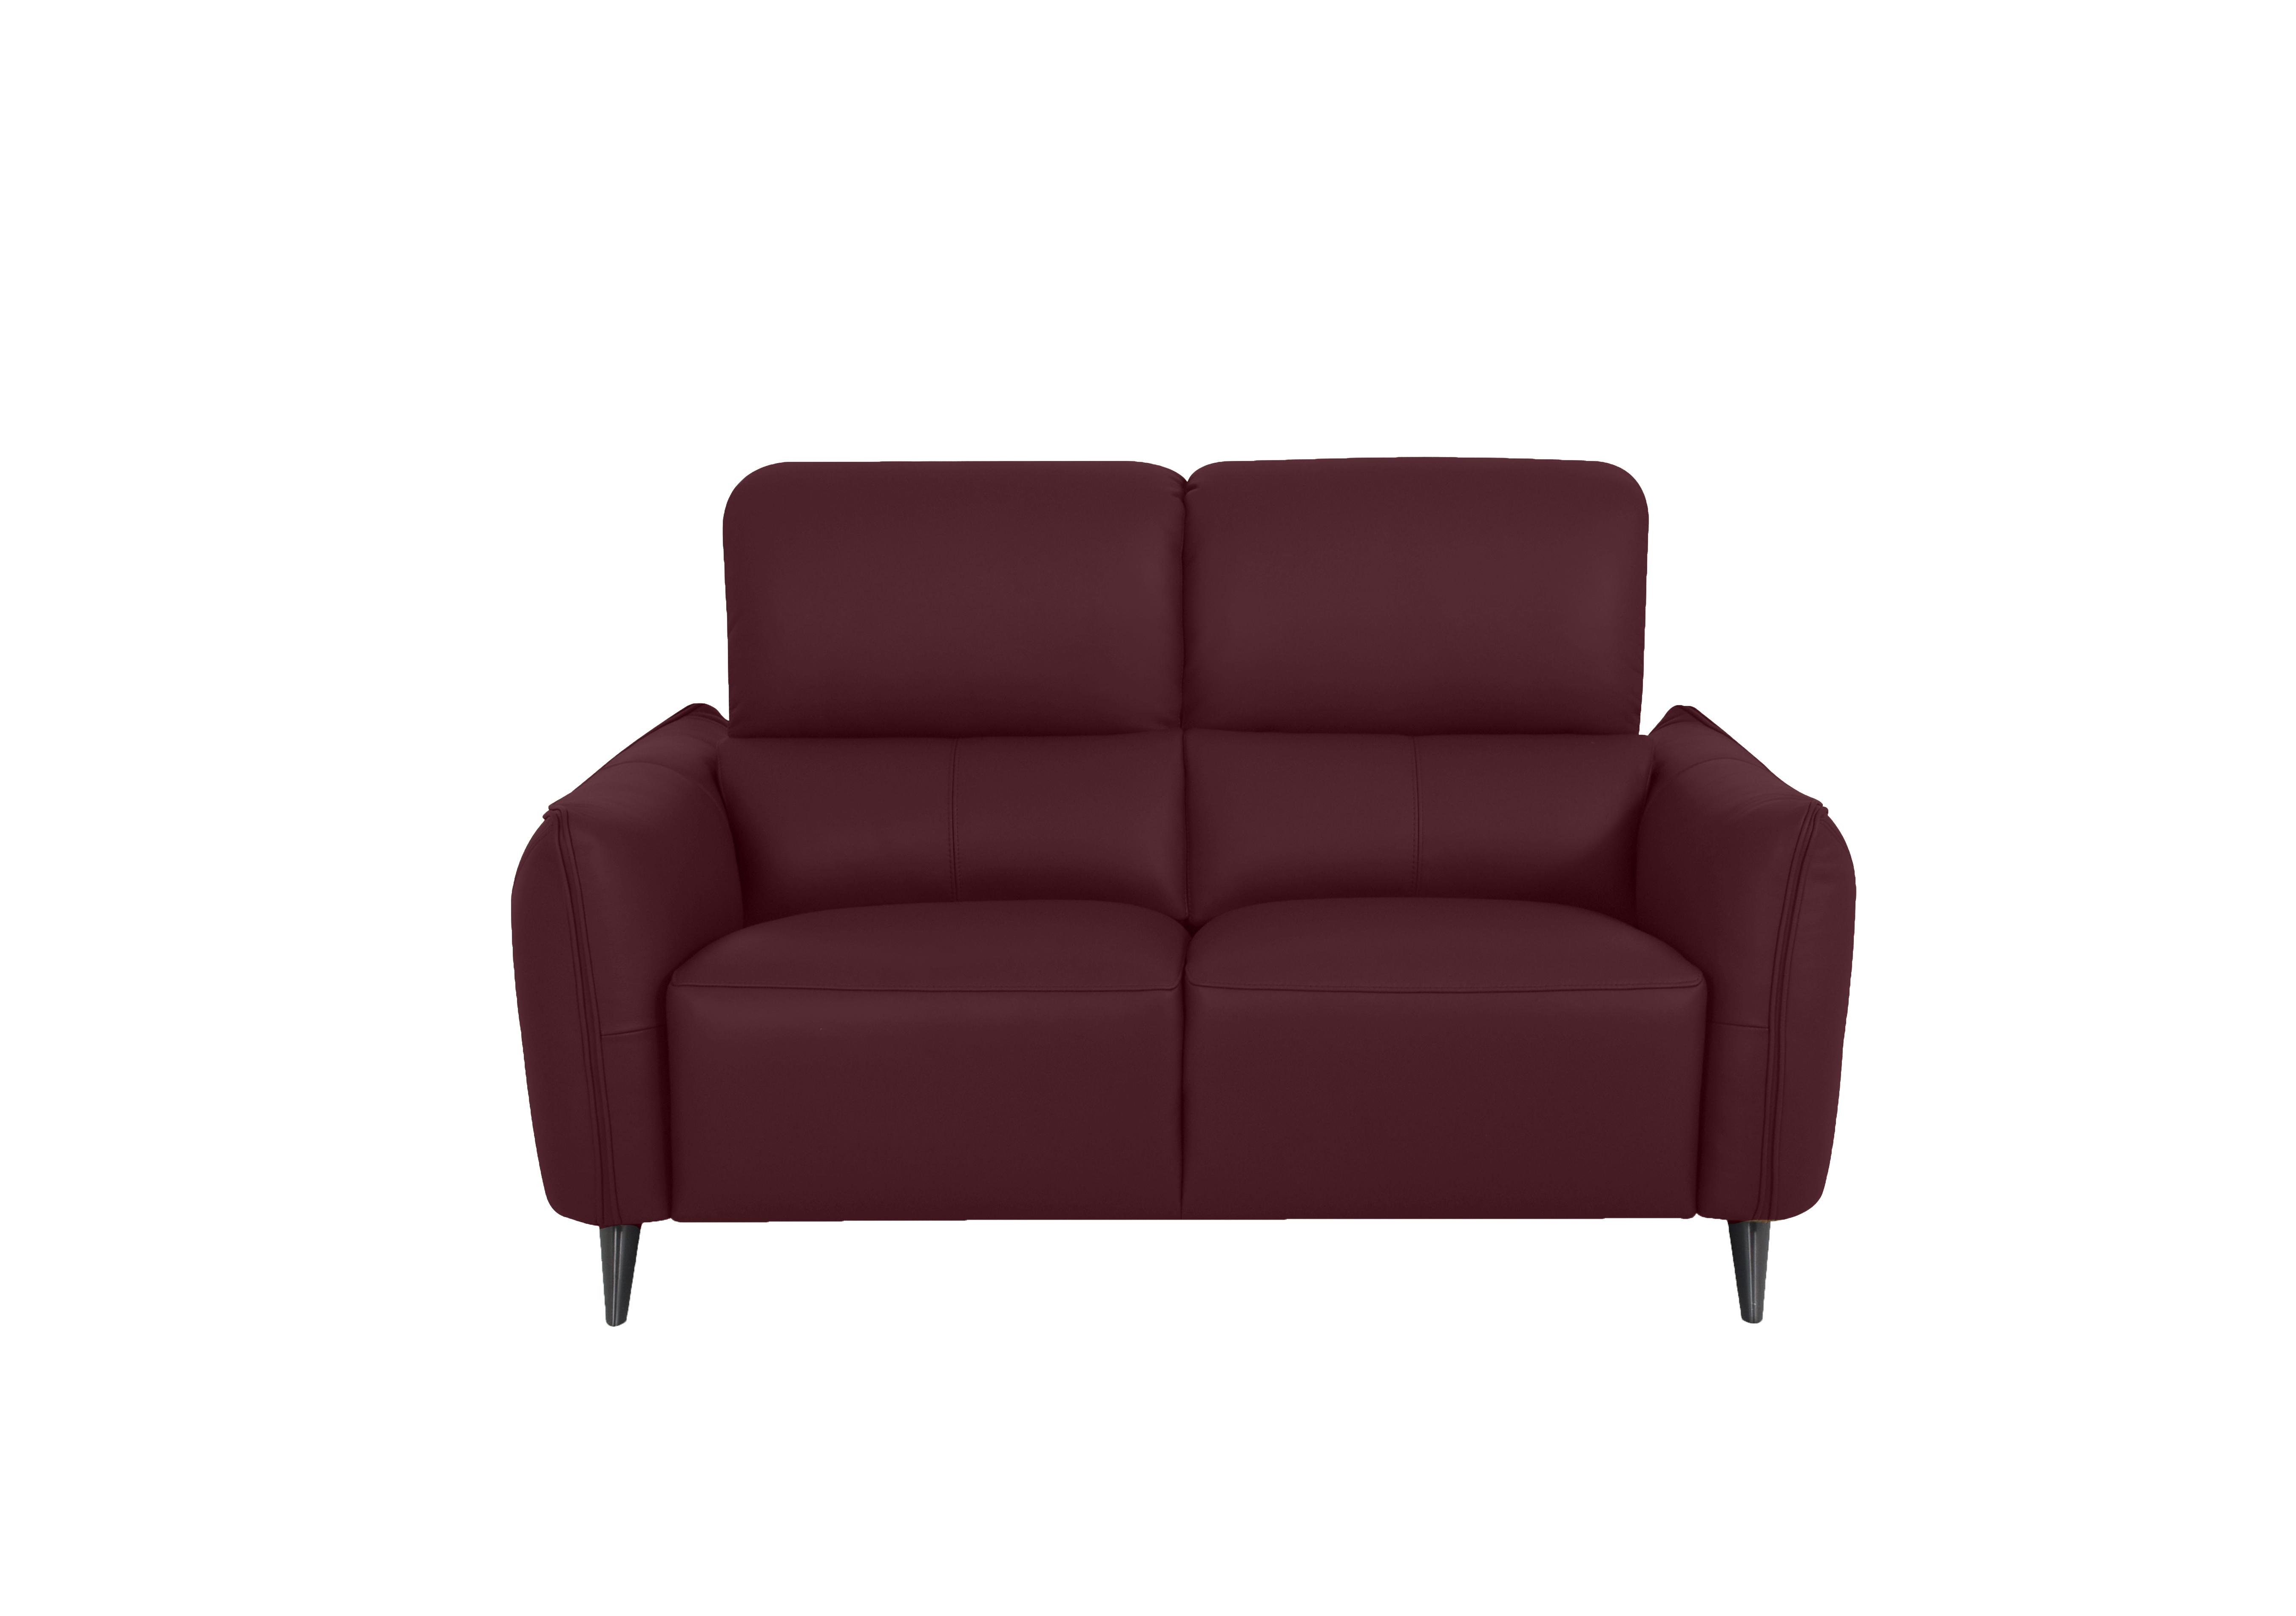 Maddox 2 Seater Leather Sofa in Np-549e Ruby on Furniture Village